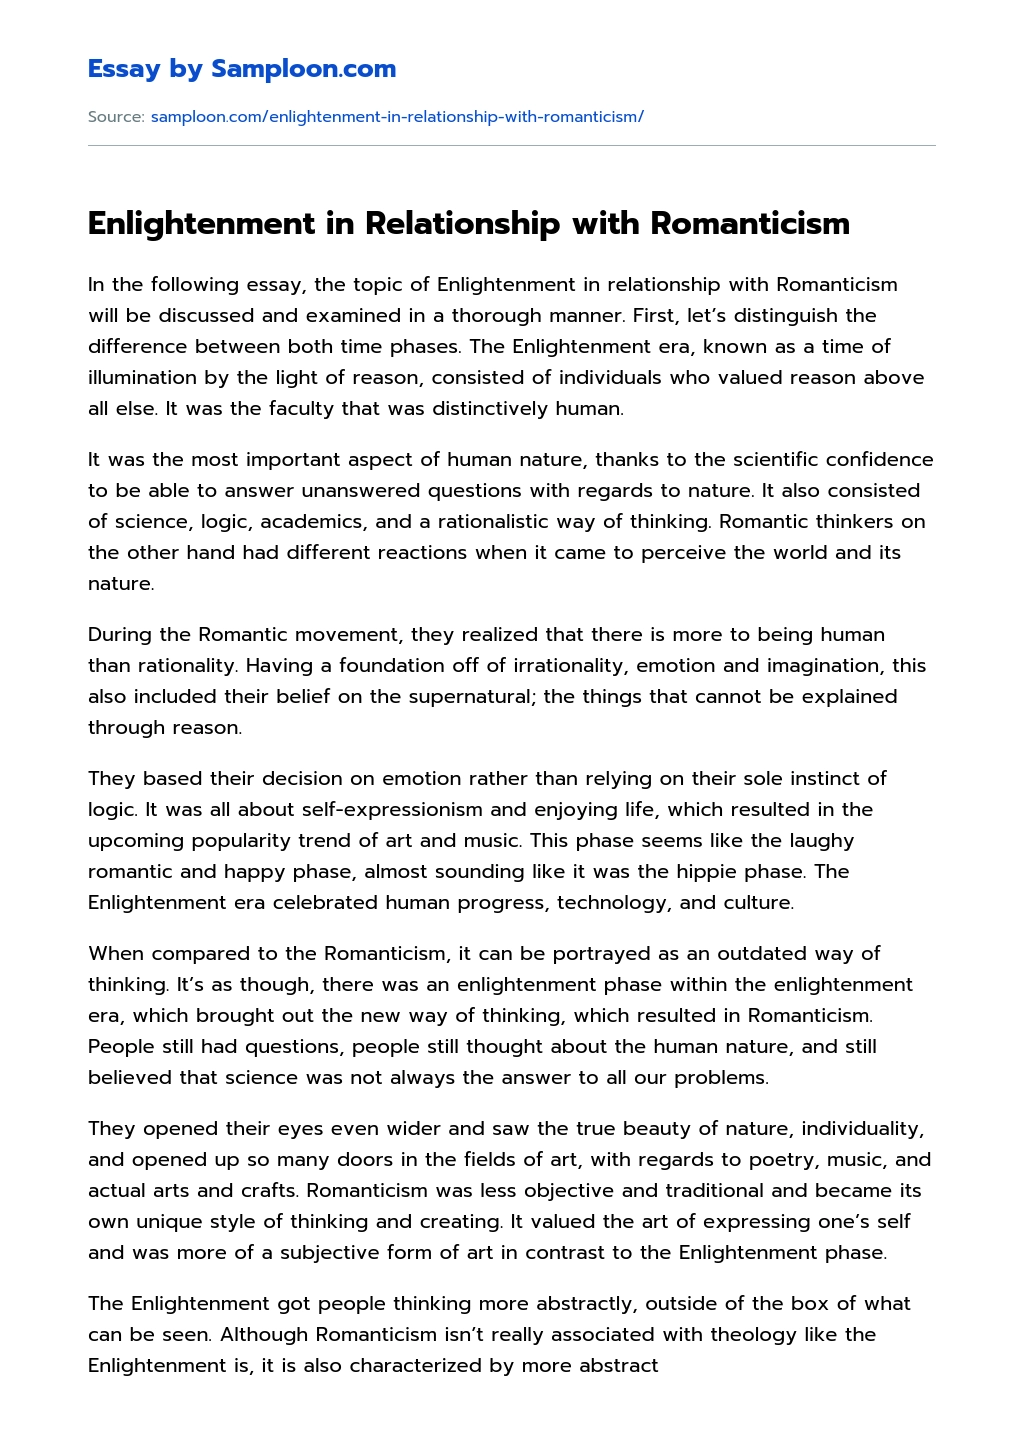 Enlightenment in Relationship with Romanticism essay